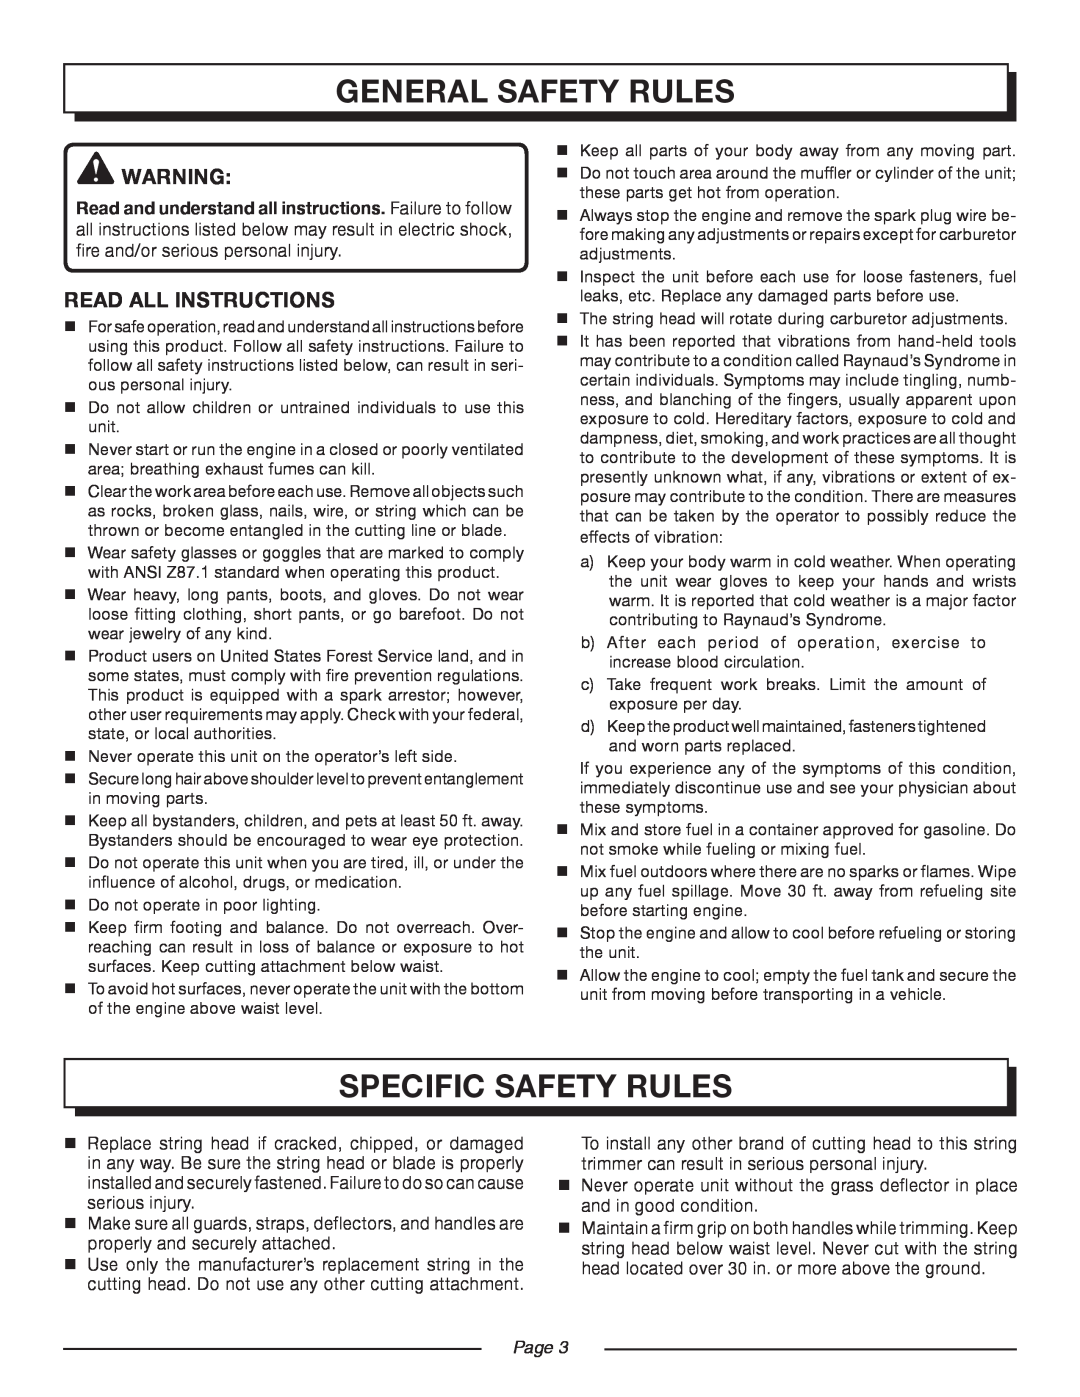 Homelite UT21907, UT21546, UT21506, UT21947 manual General Safety Rules, Specific Safety Rules, read all instructions, Page  